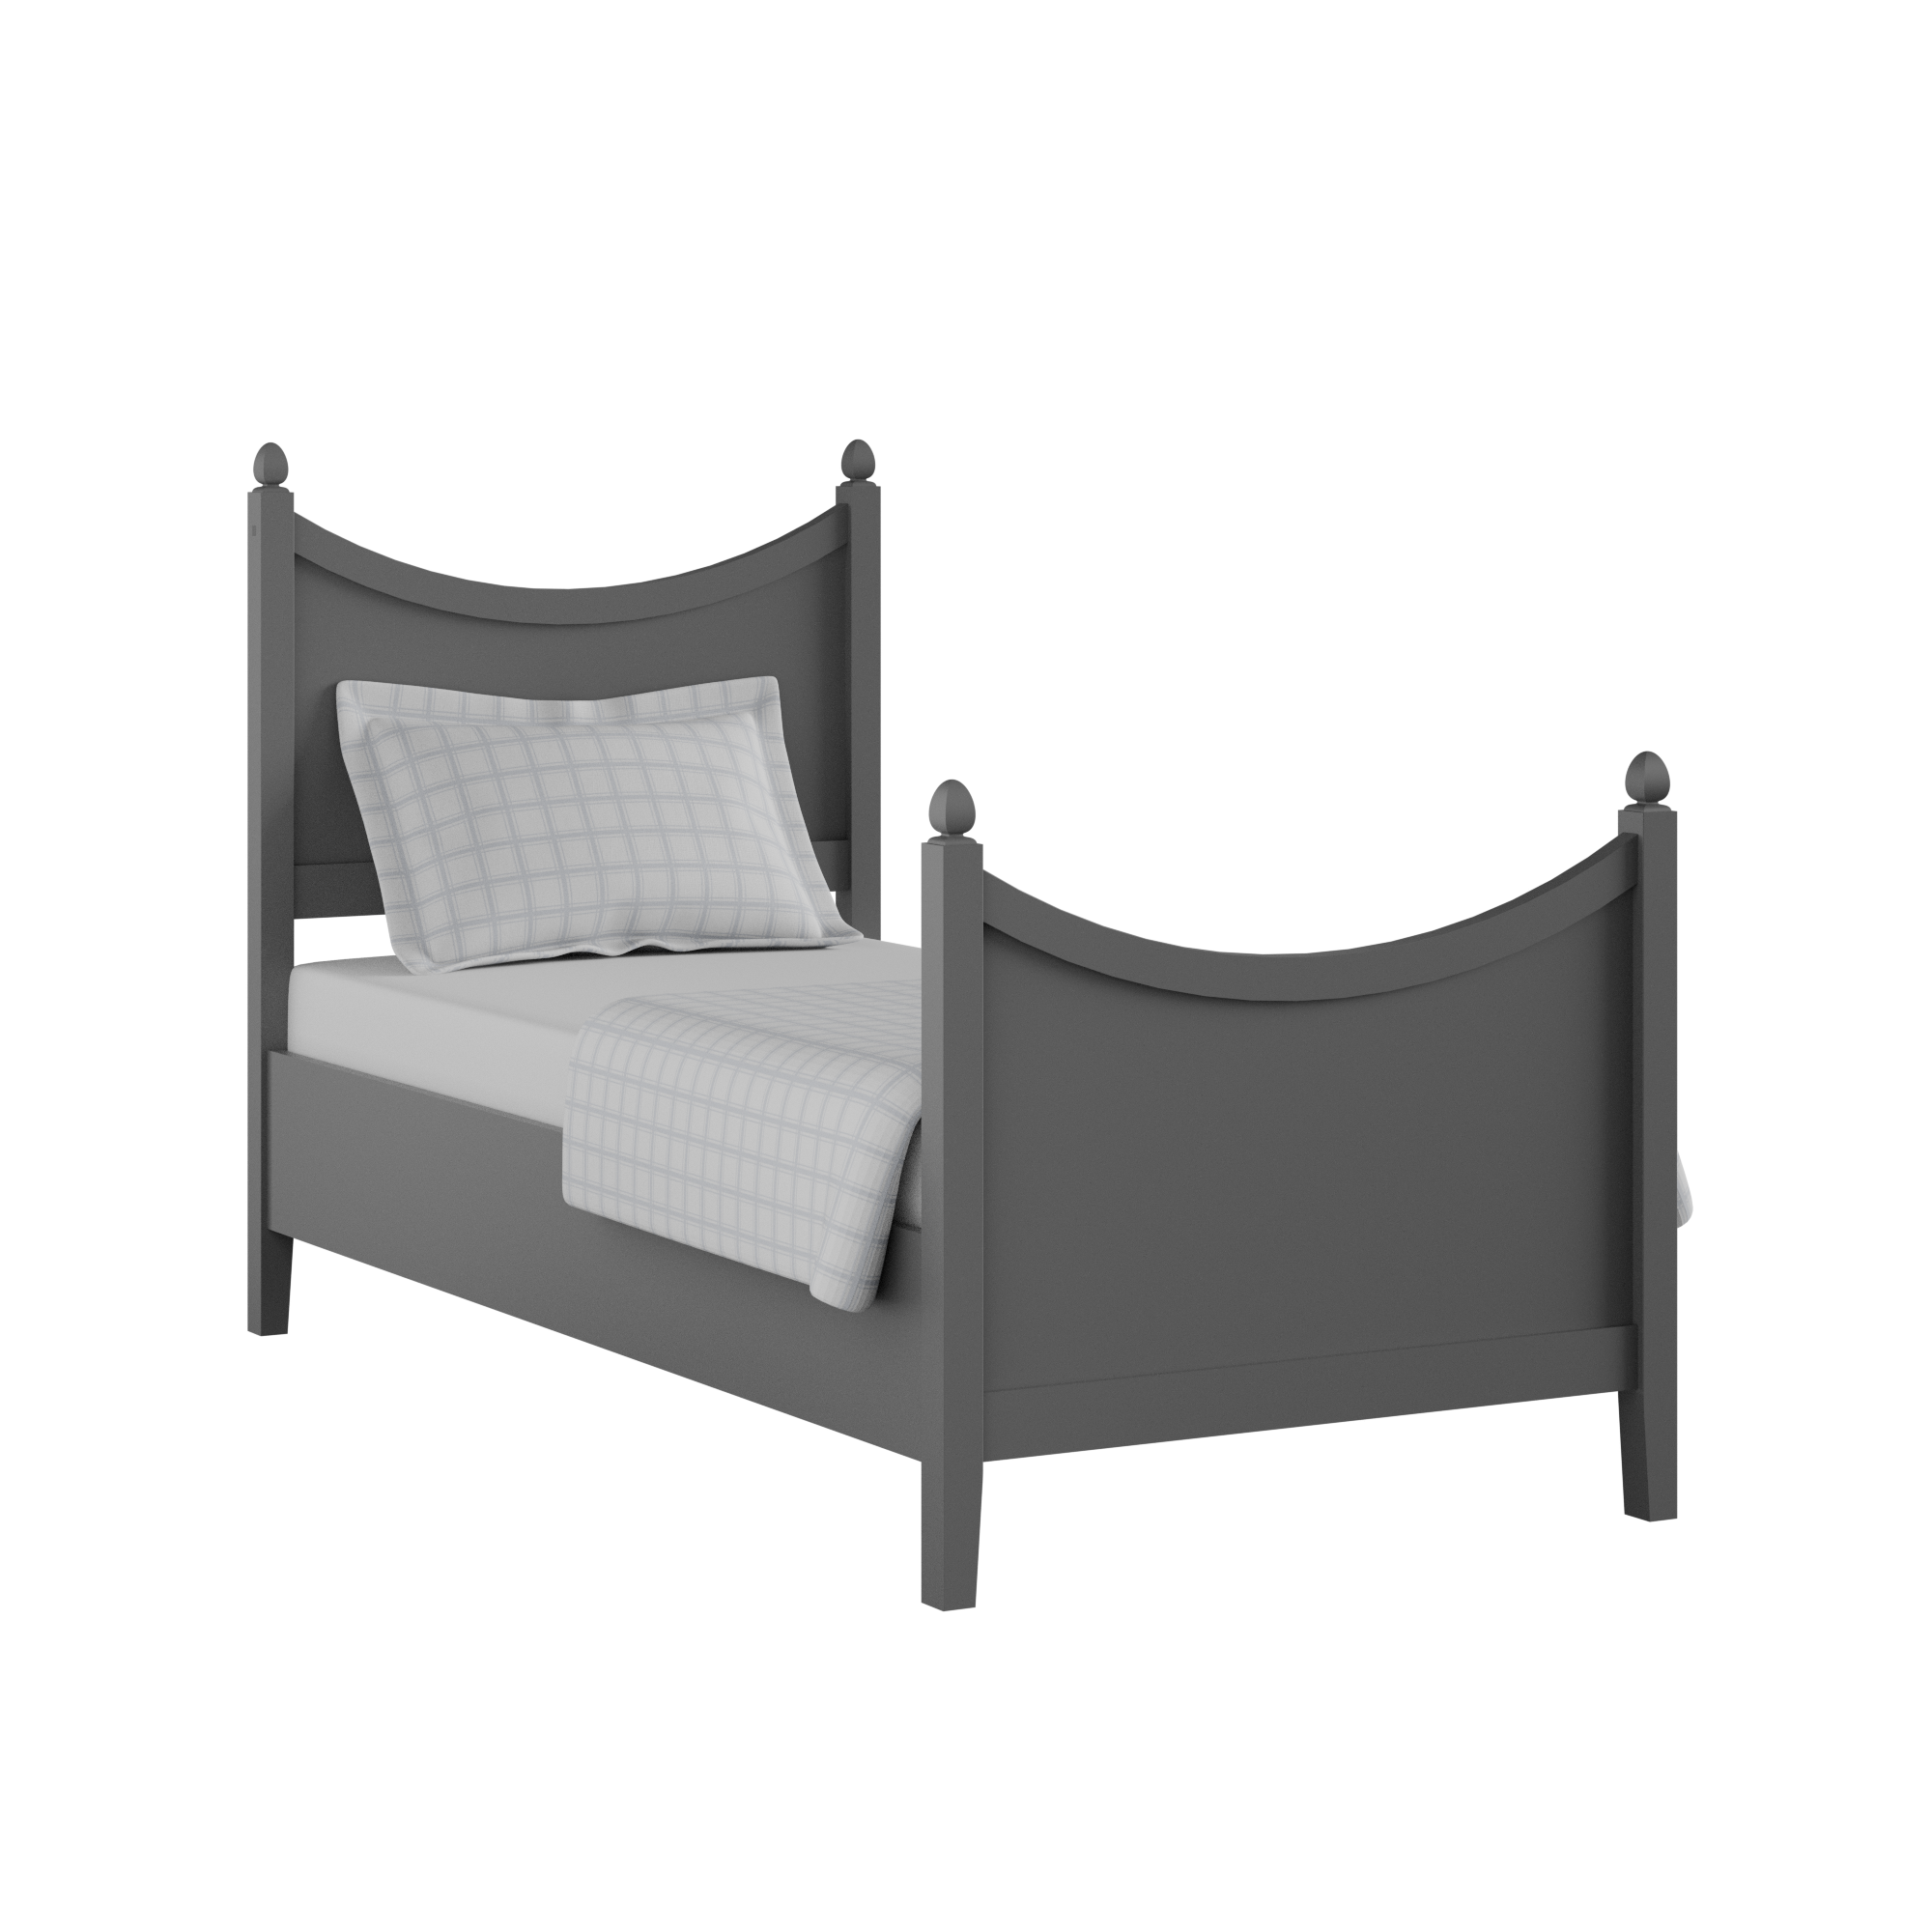 Blake Painted single painted wood bed in grey with Juno mattress